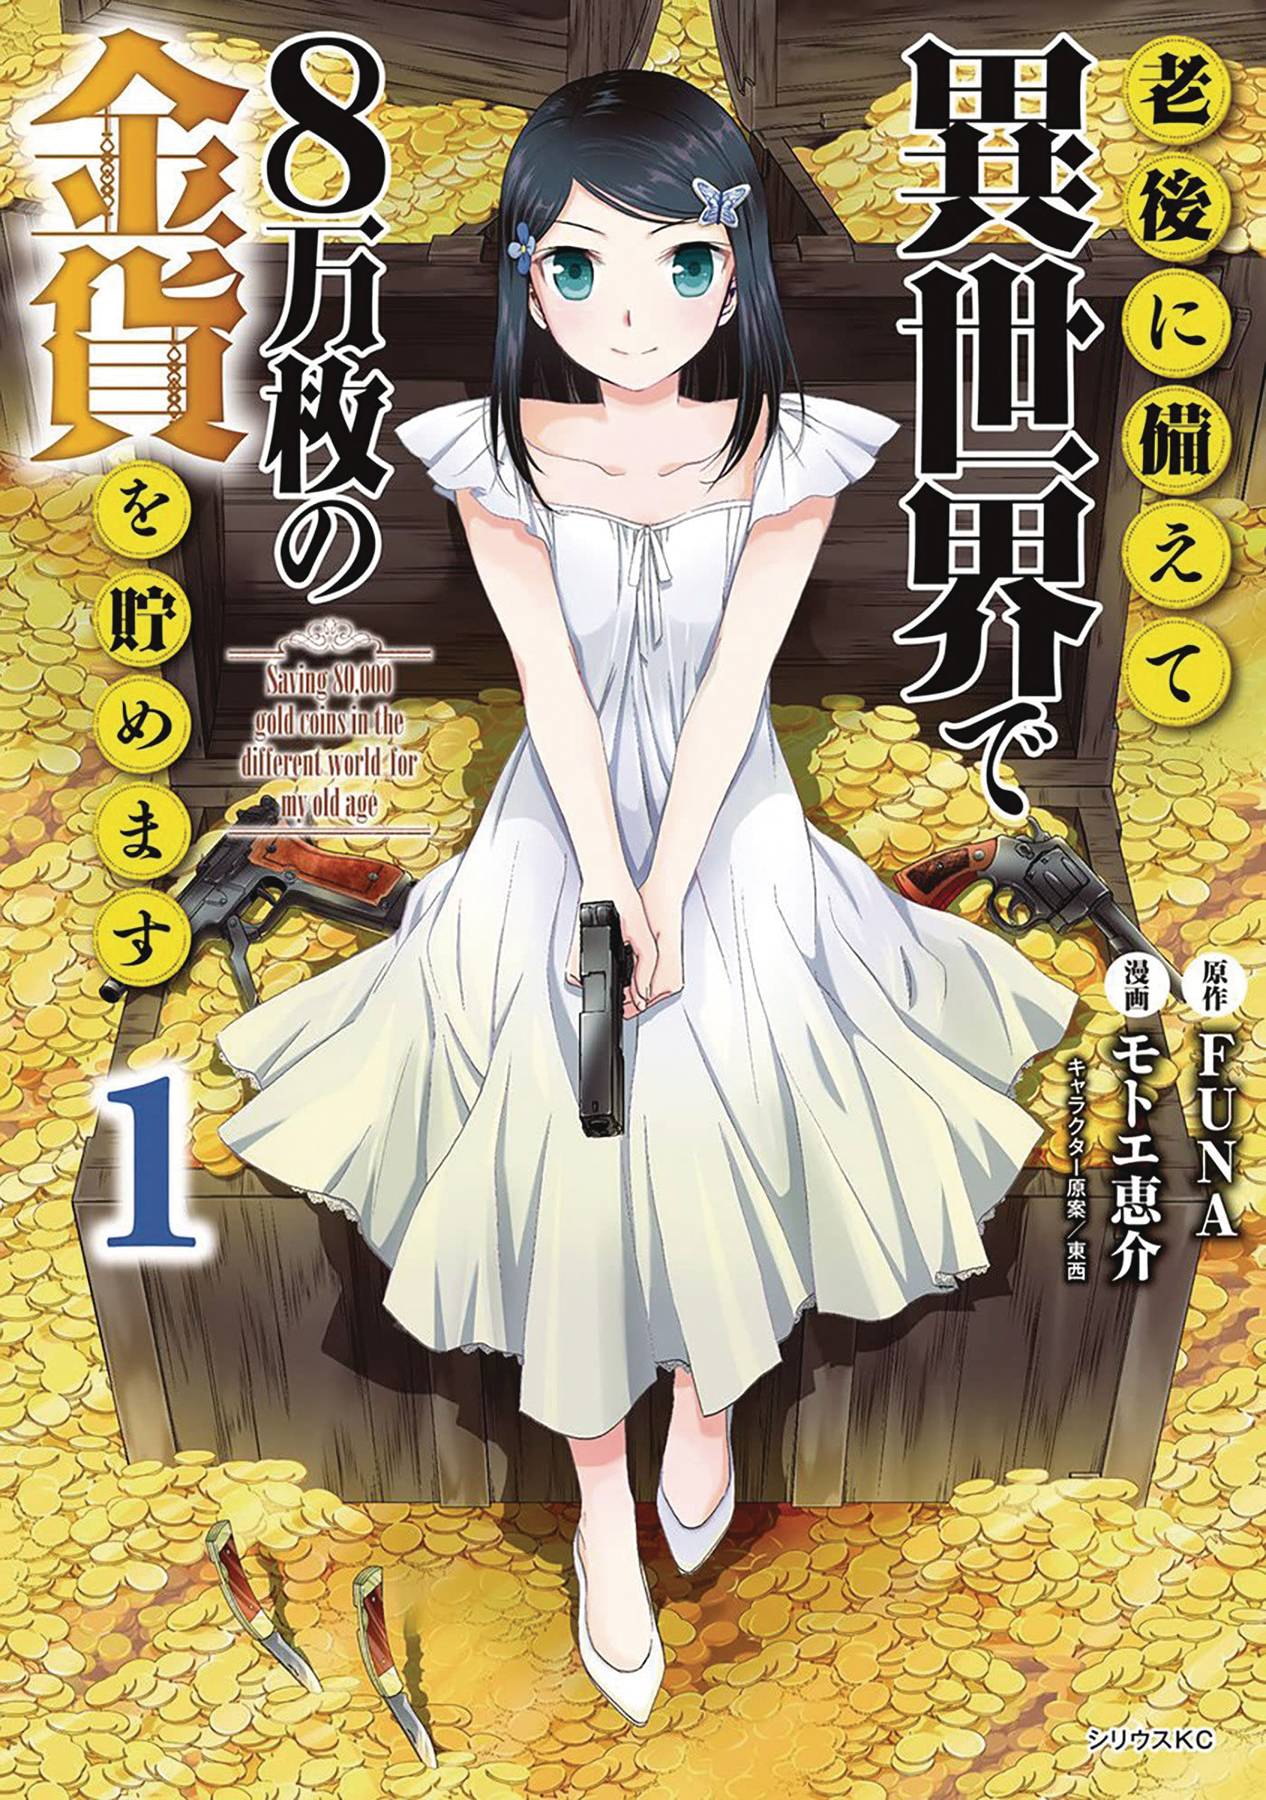 Saving 80K Gold In Another World L Novel Vol 01 (C: 0-1-2) (4/19/2023)